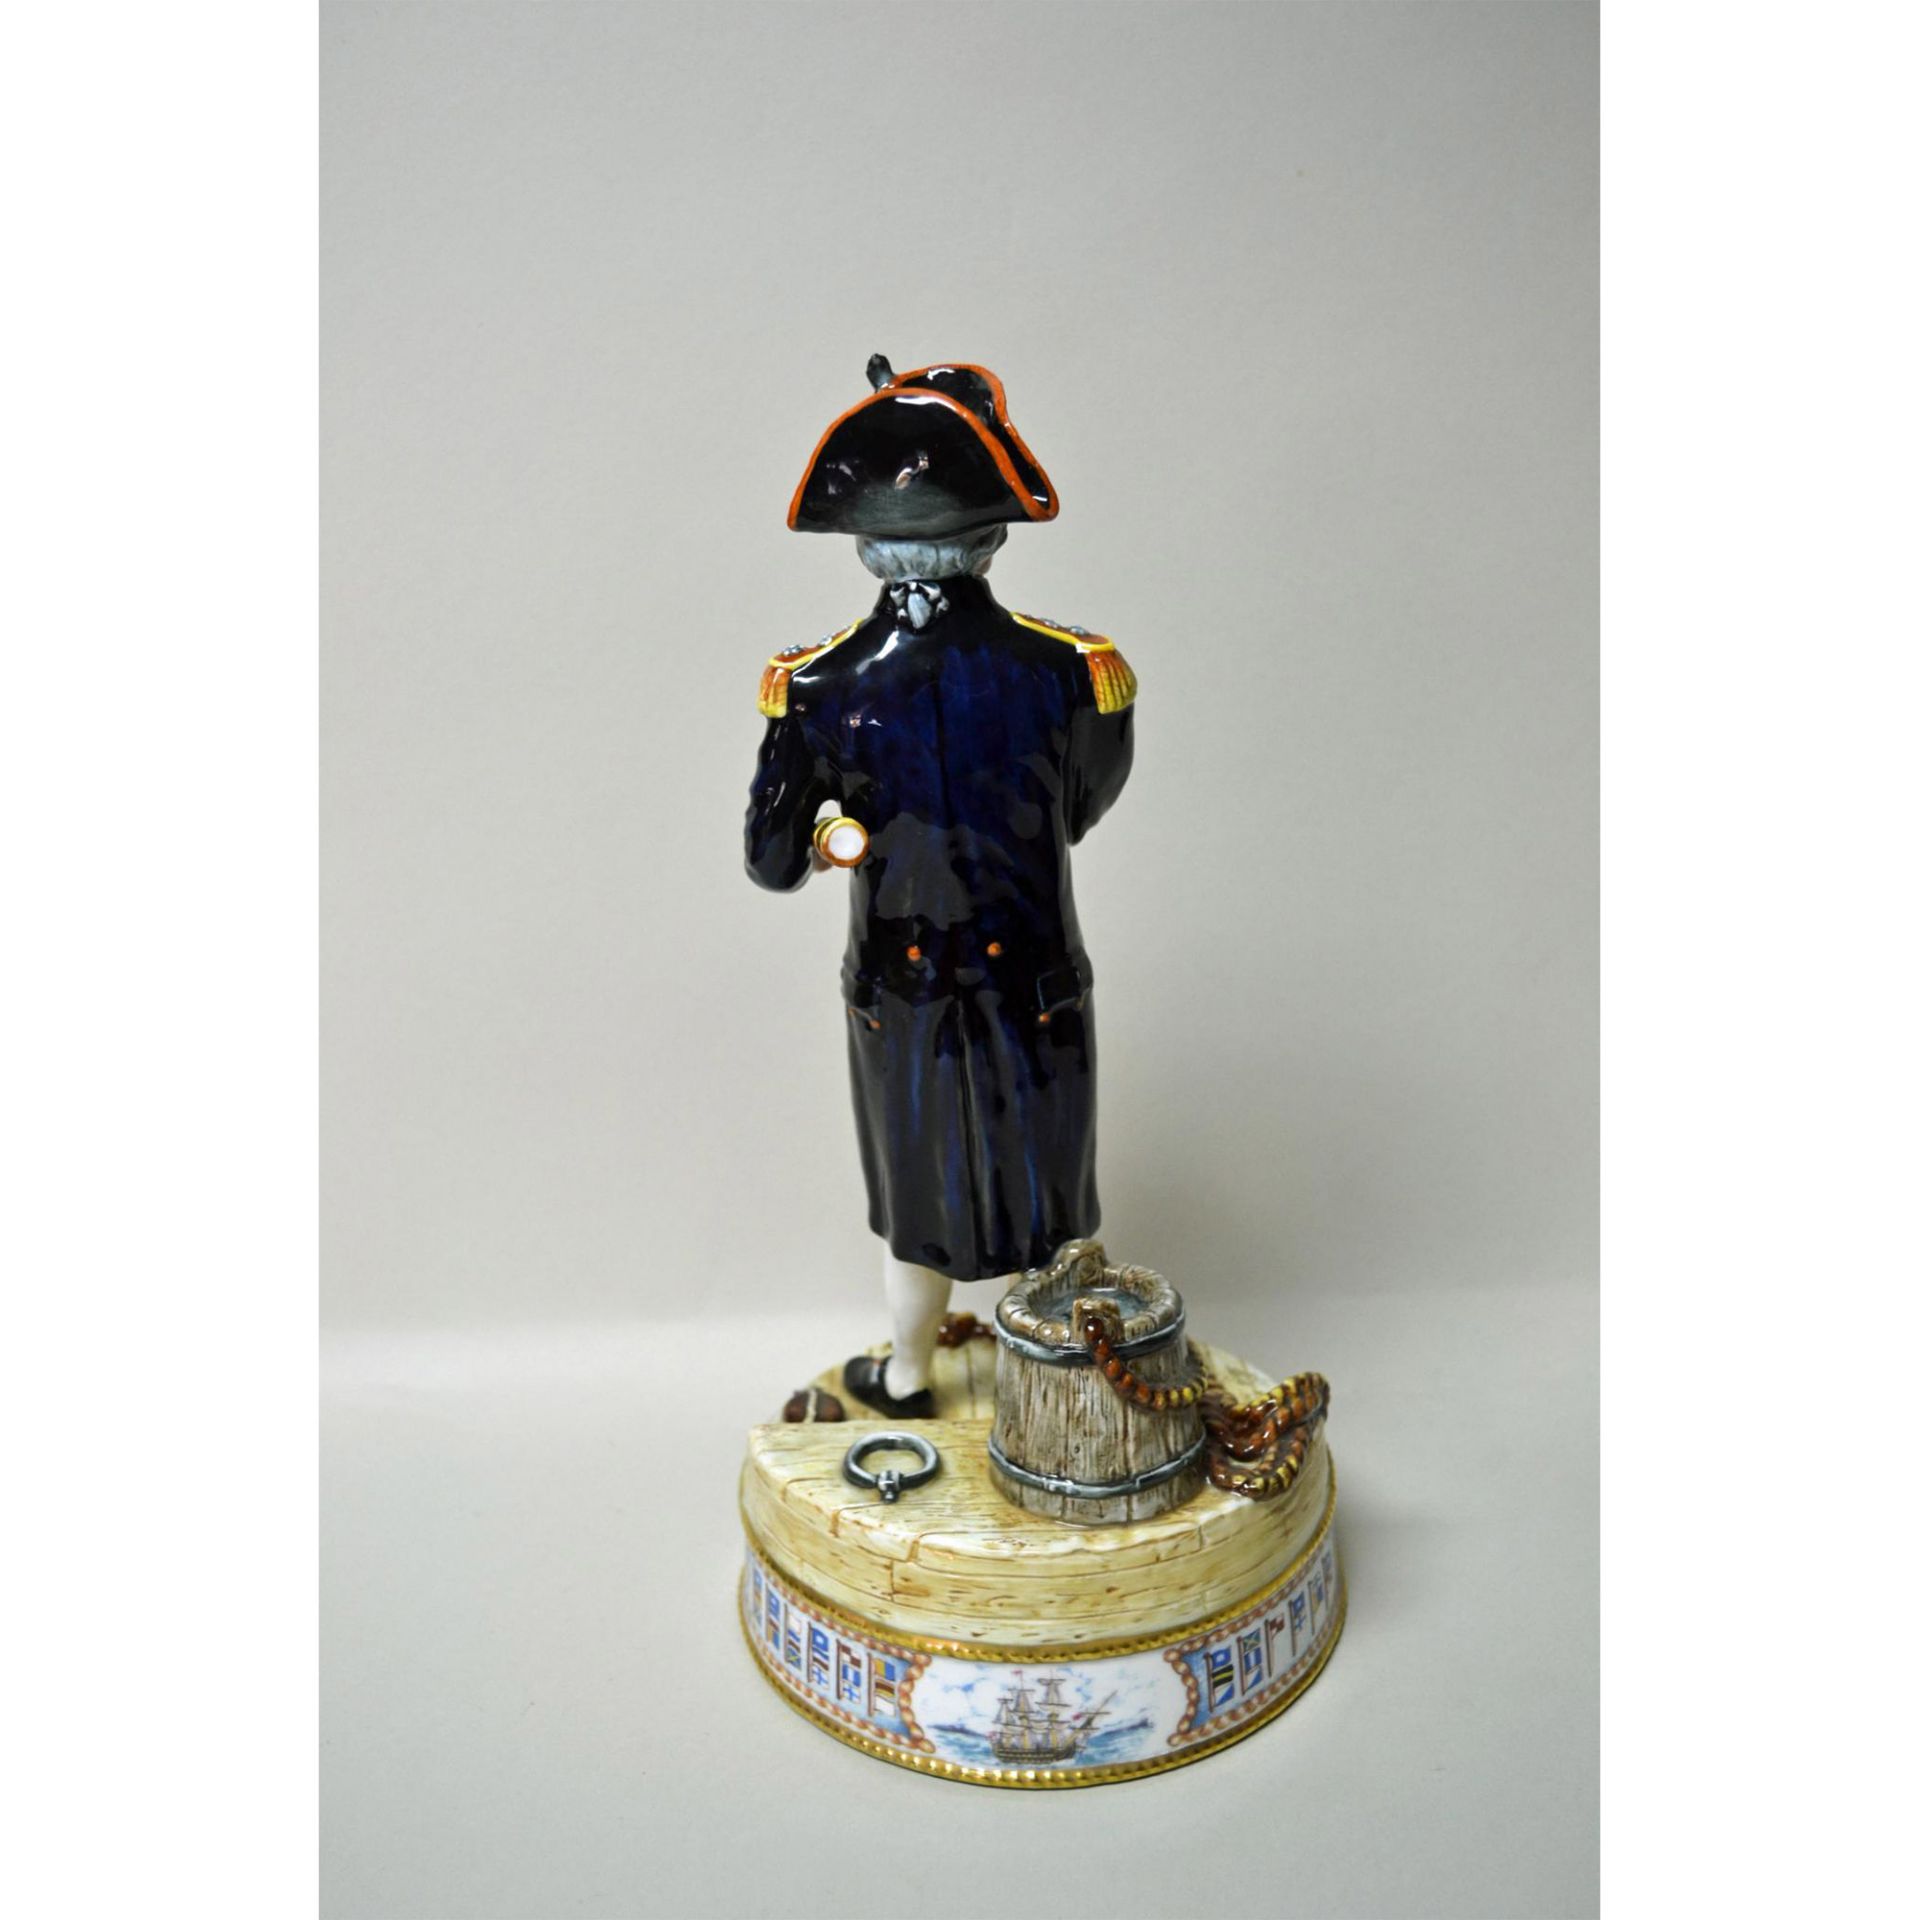 Royal Doulton Porcelain Vice Admiral Lord Nelson Figurine, Hn 3489, Limited Edition, Signed By Sir M - Image 3 of 4